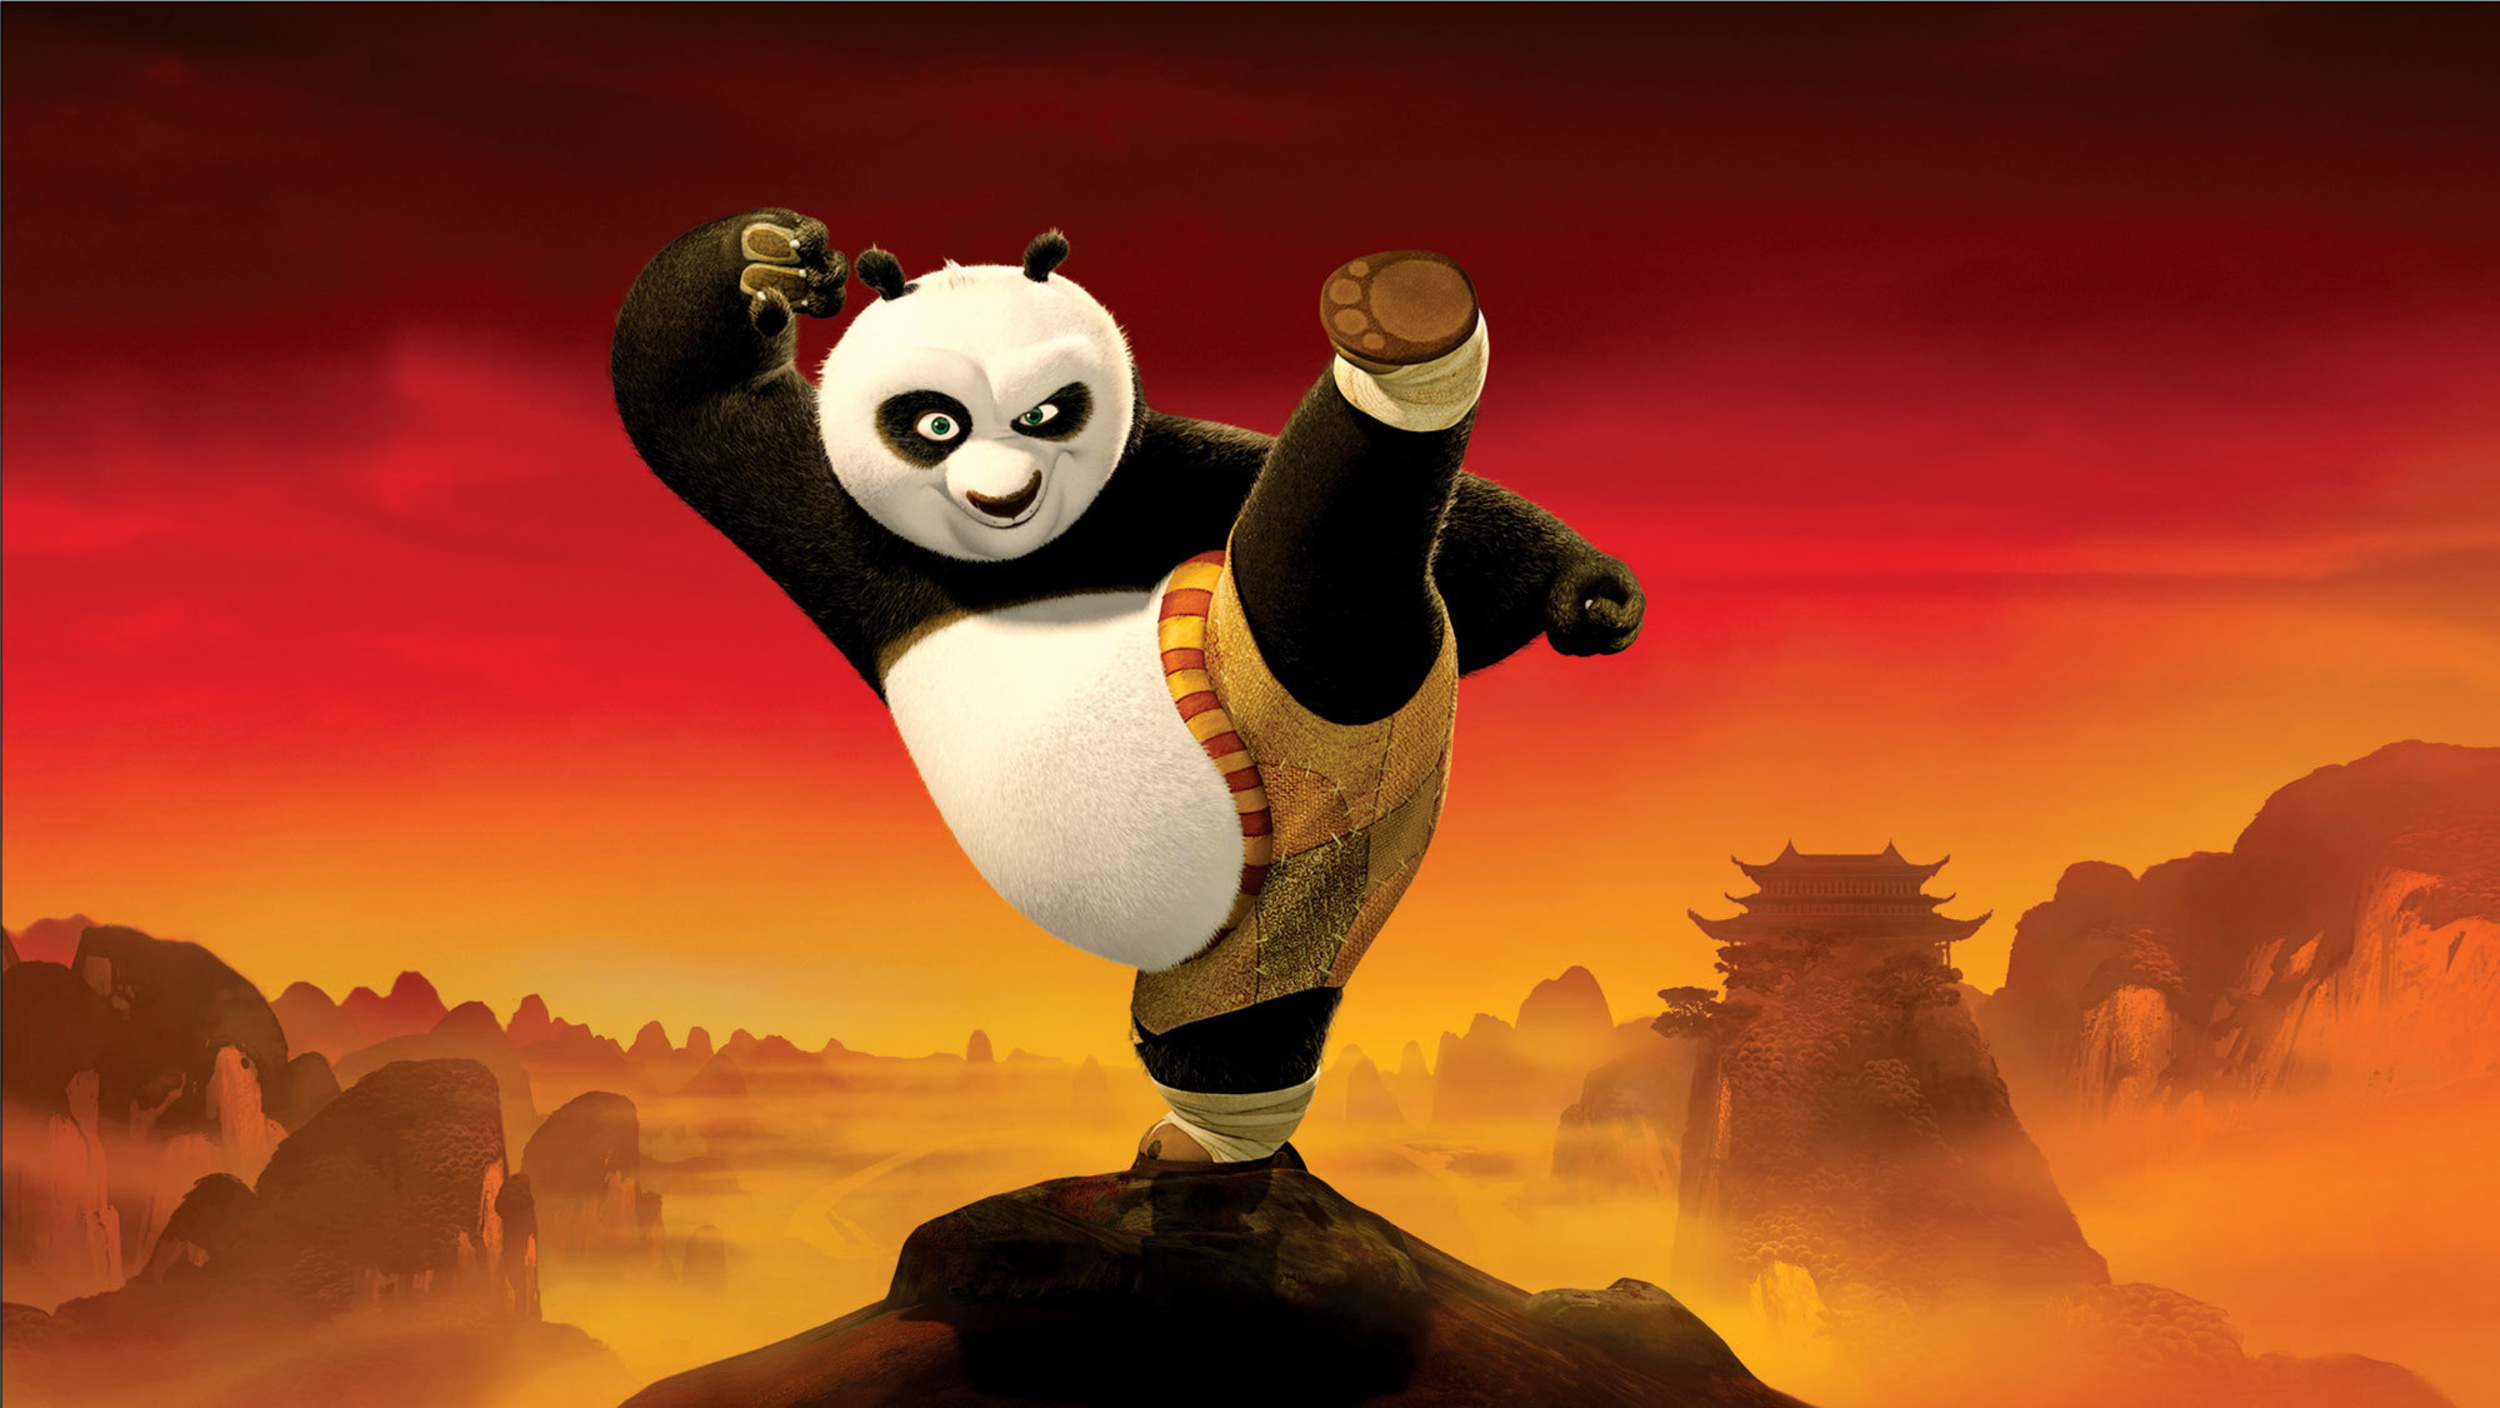 <p><span>Pandas are one of the few animals almost everyone can agree are one of the most precious on Earth. Pair that with a kick-butt tale of an underdog becoming the best, and you have gold.</span></p><p>You may also like: <a href='https://www.yardbarker.com/entertainment/articles/great_soundtracks_from_obscure_or_underrated_movies/s1__39830162'>Great soundtracks from obscure or underrated movies</a></p>